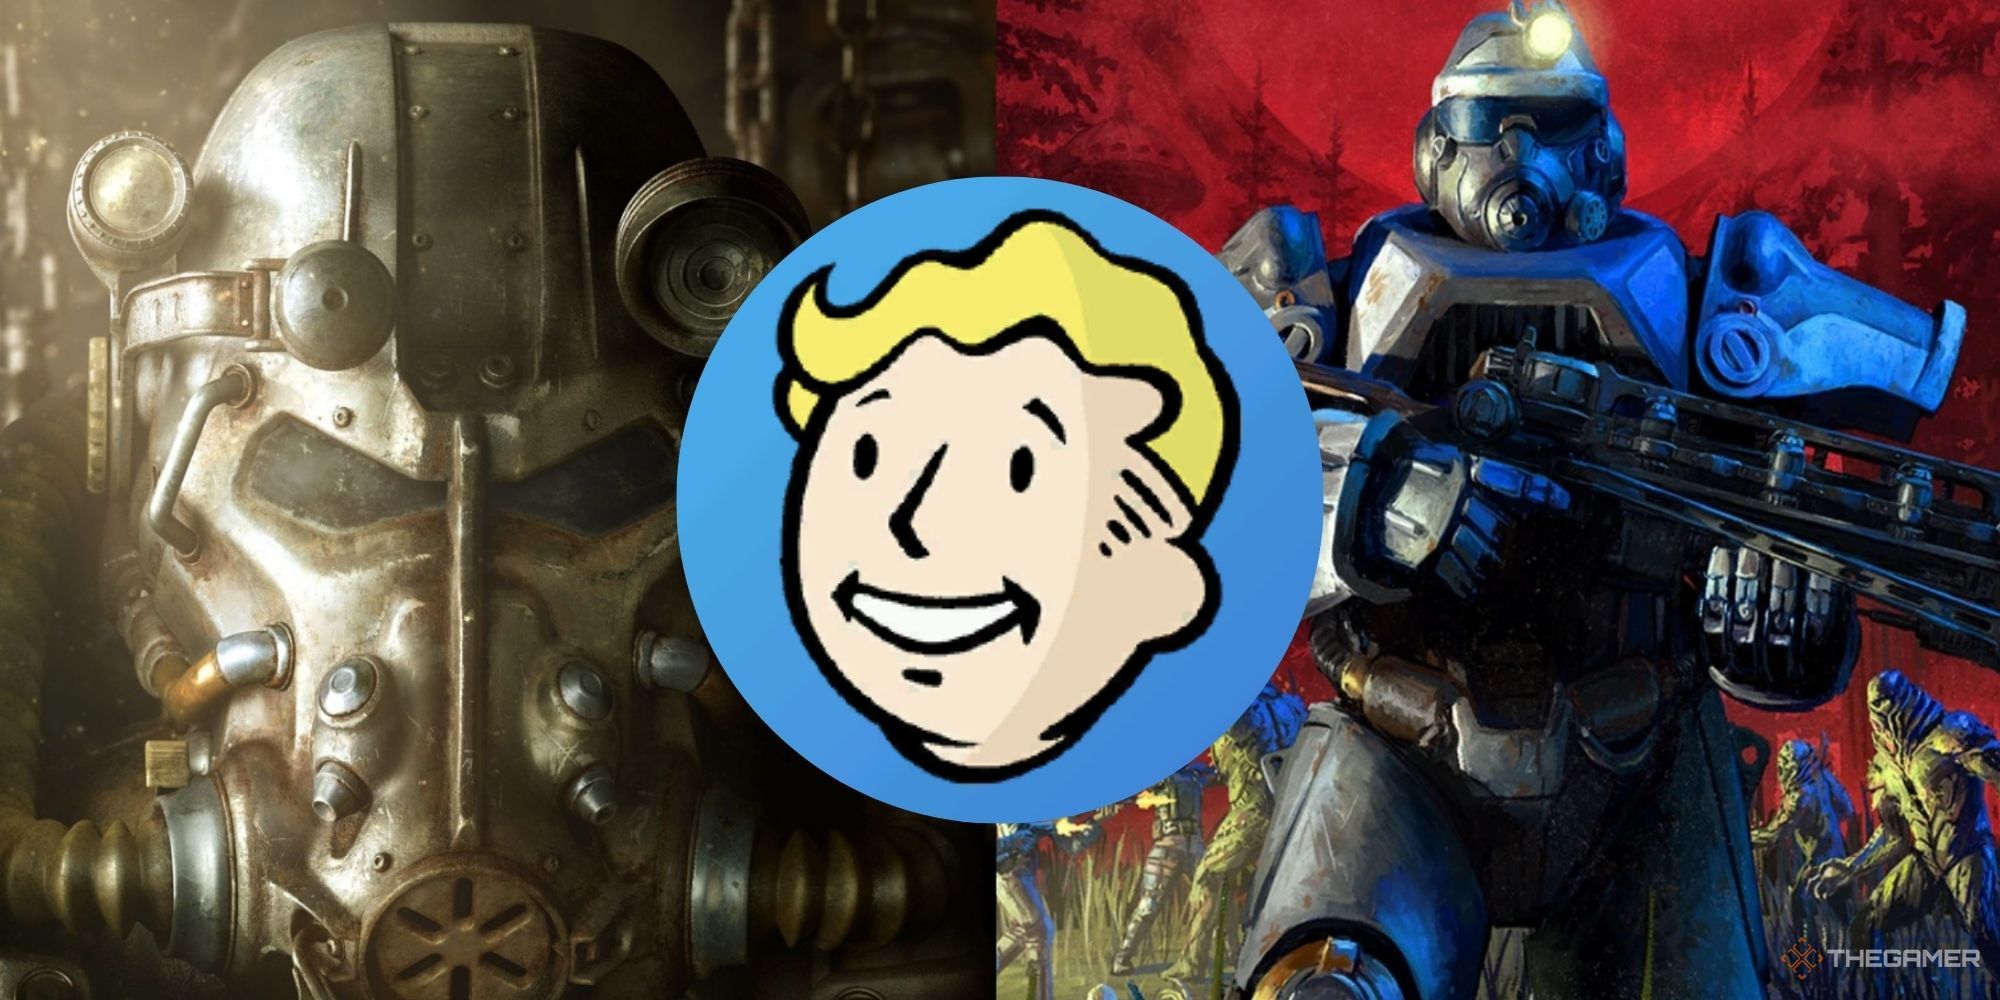 fallout 4 and fallout 76 power armor with vault boy in the middle